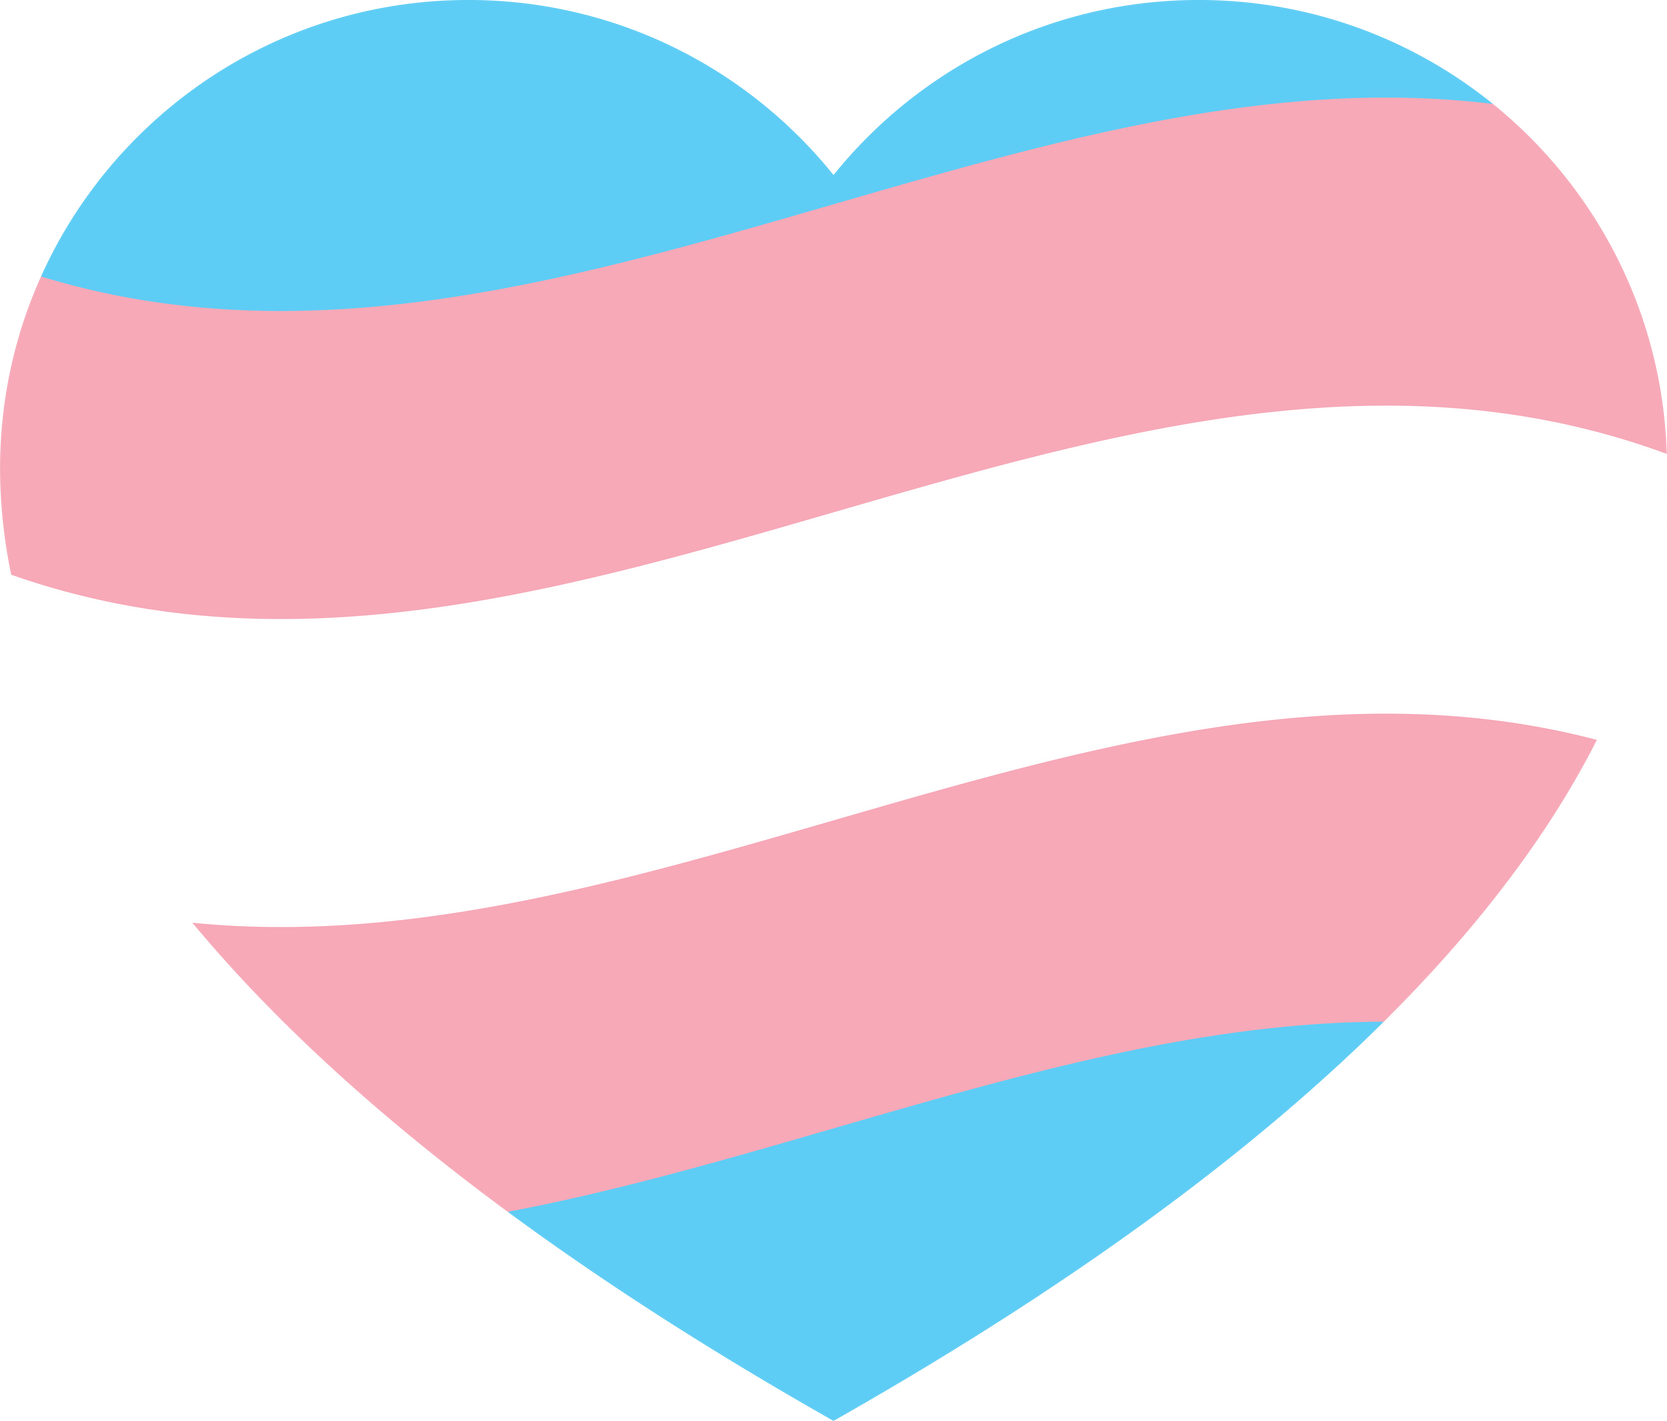 Blue, pink and white colored heart icon, as the colors of the transgender flag. LGBTQI concept. Flat design illustration.